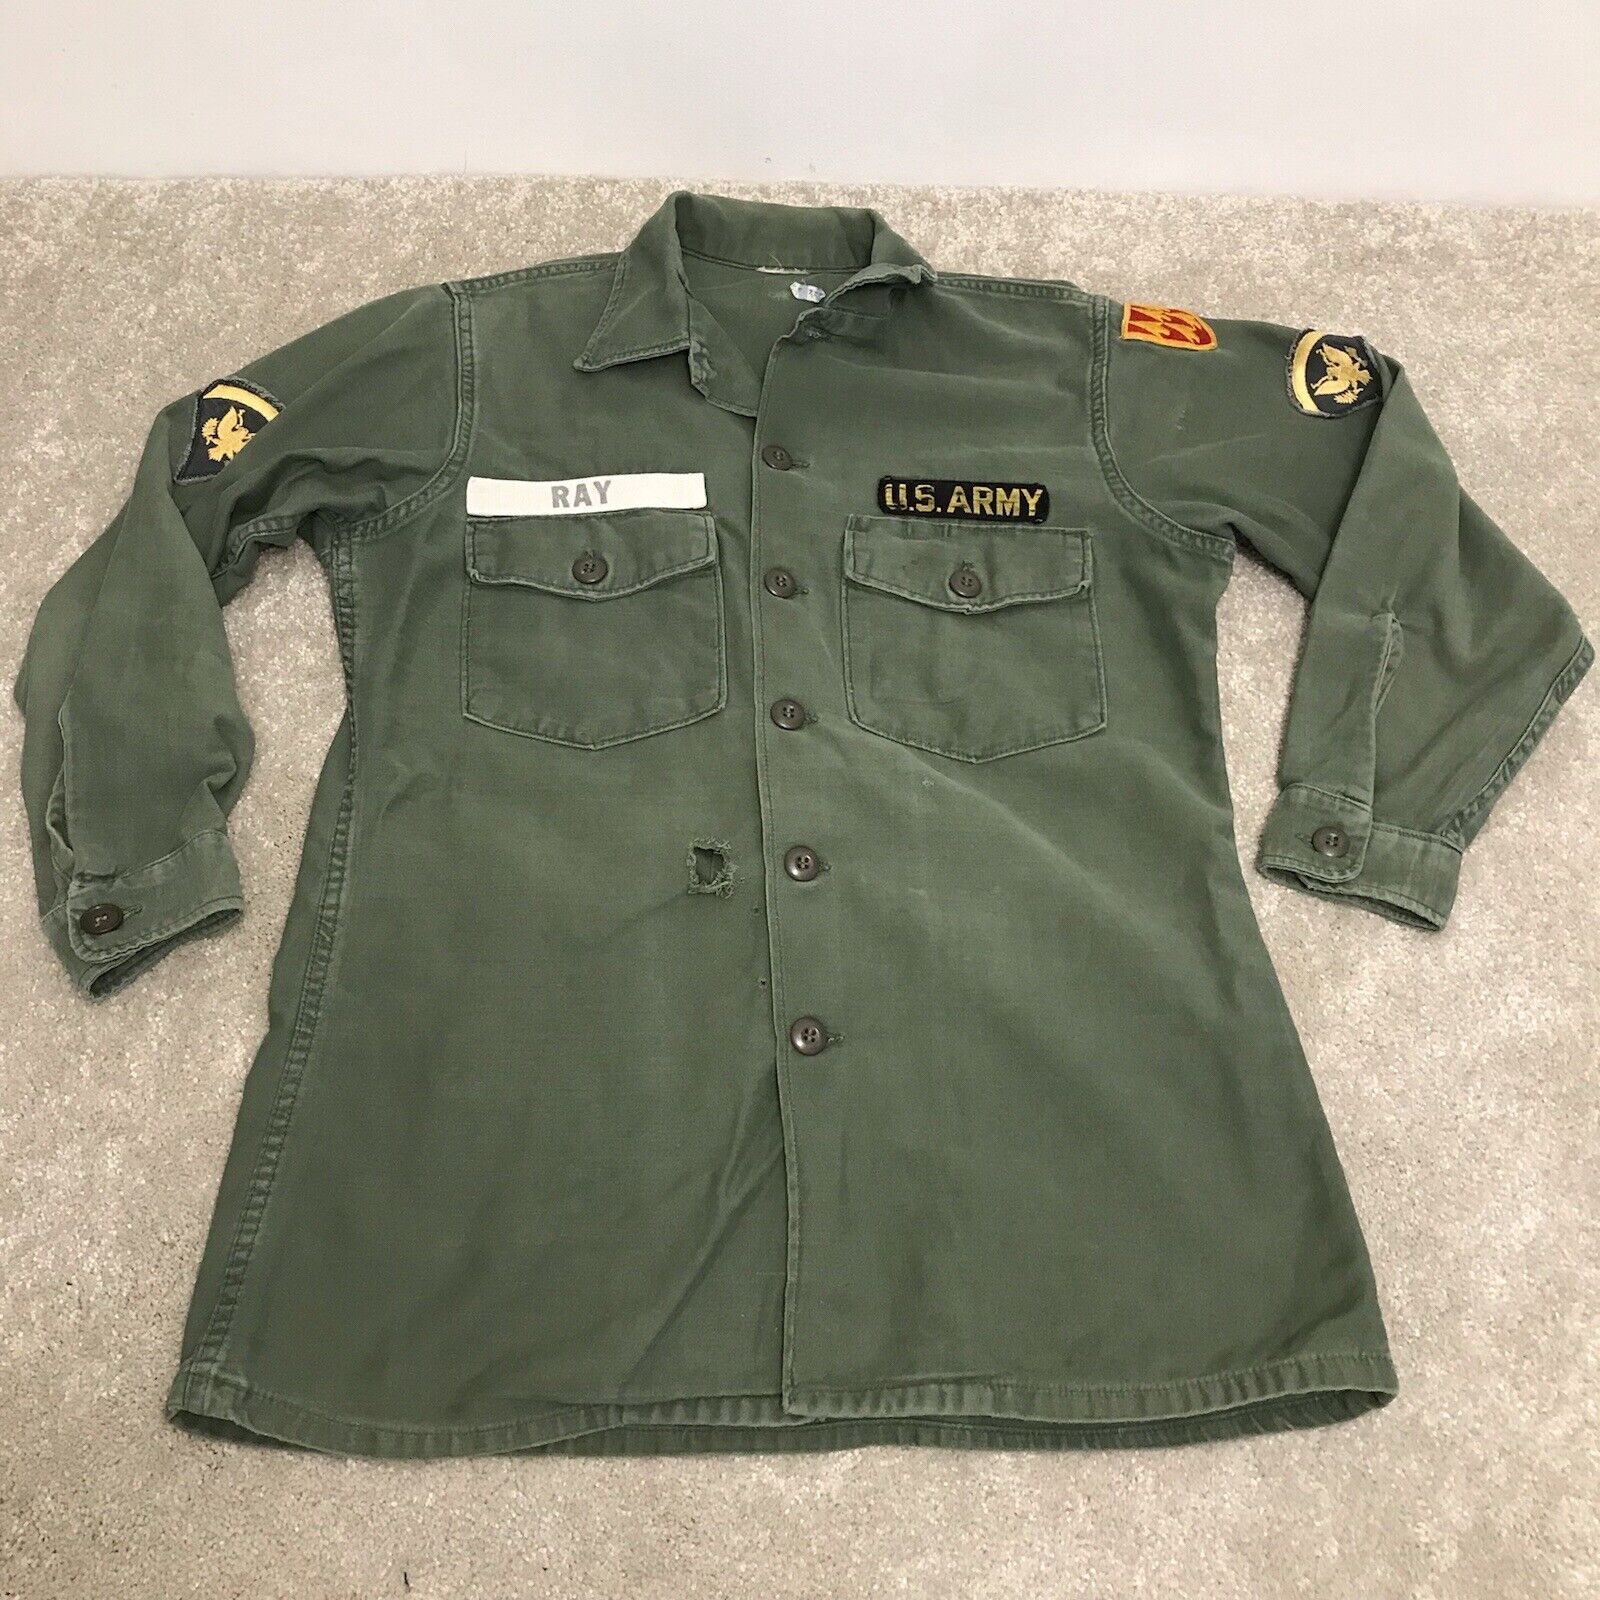 Vtg Army OG 107 Vietnam Fatigue Shirt 60s 70s Patches RAY Last Name DAMAGED